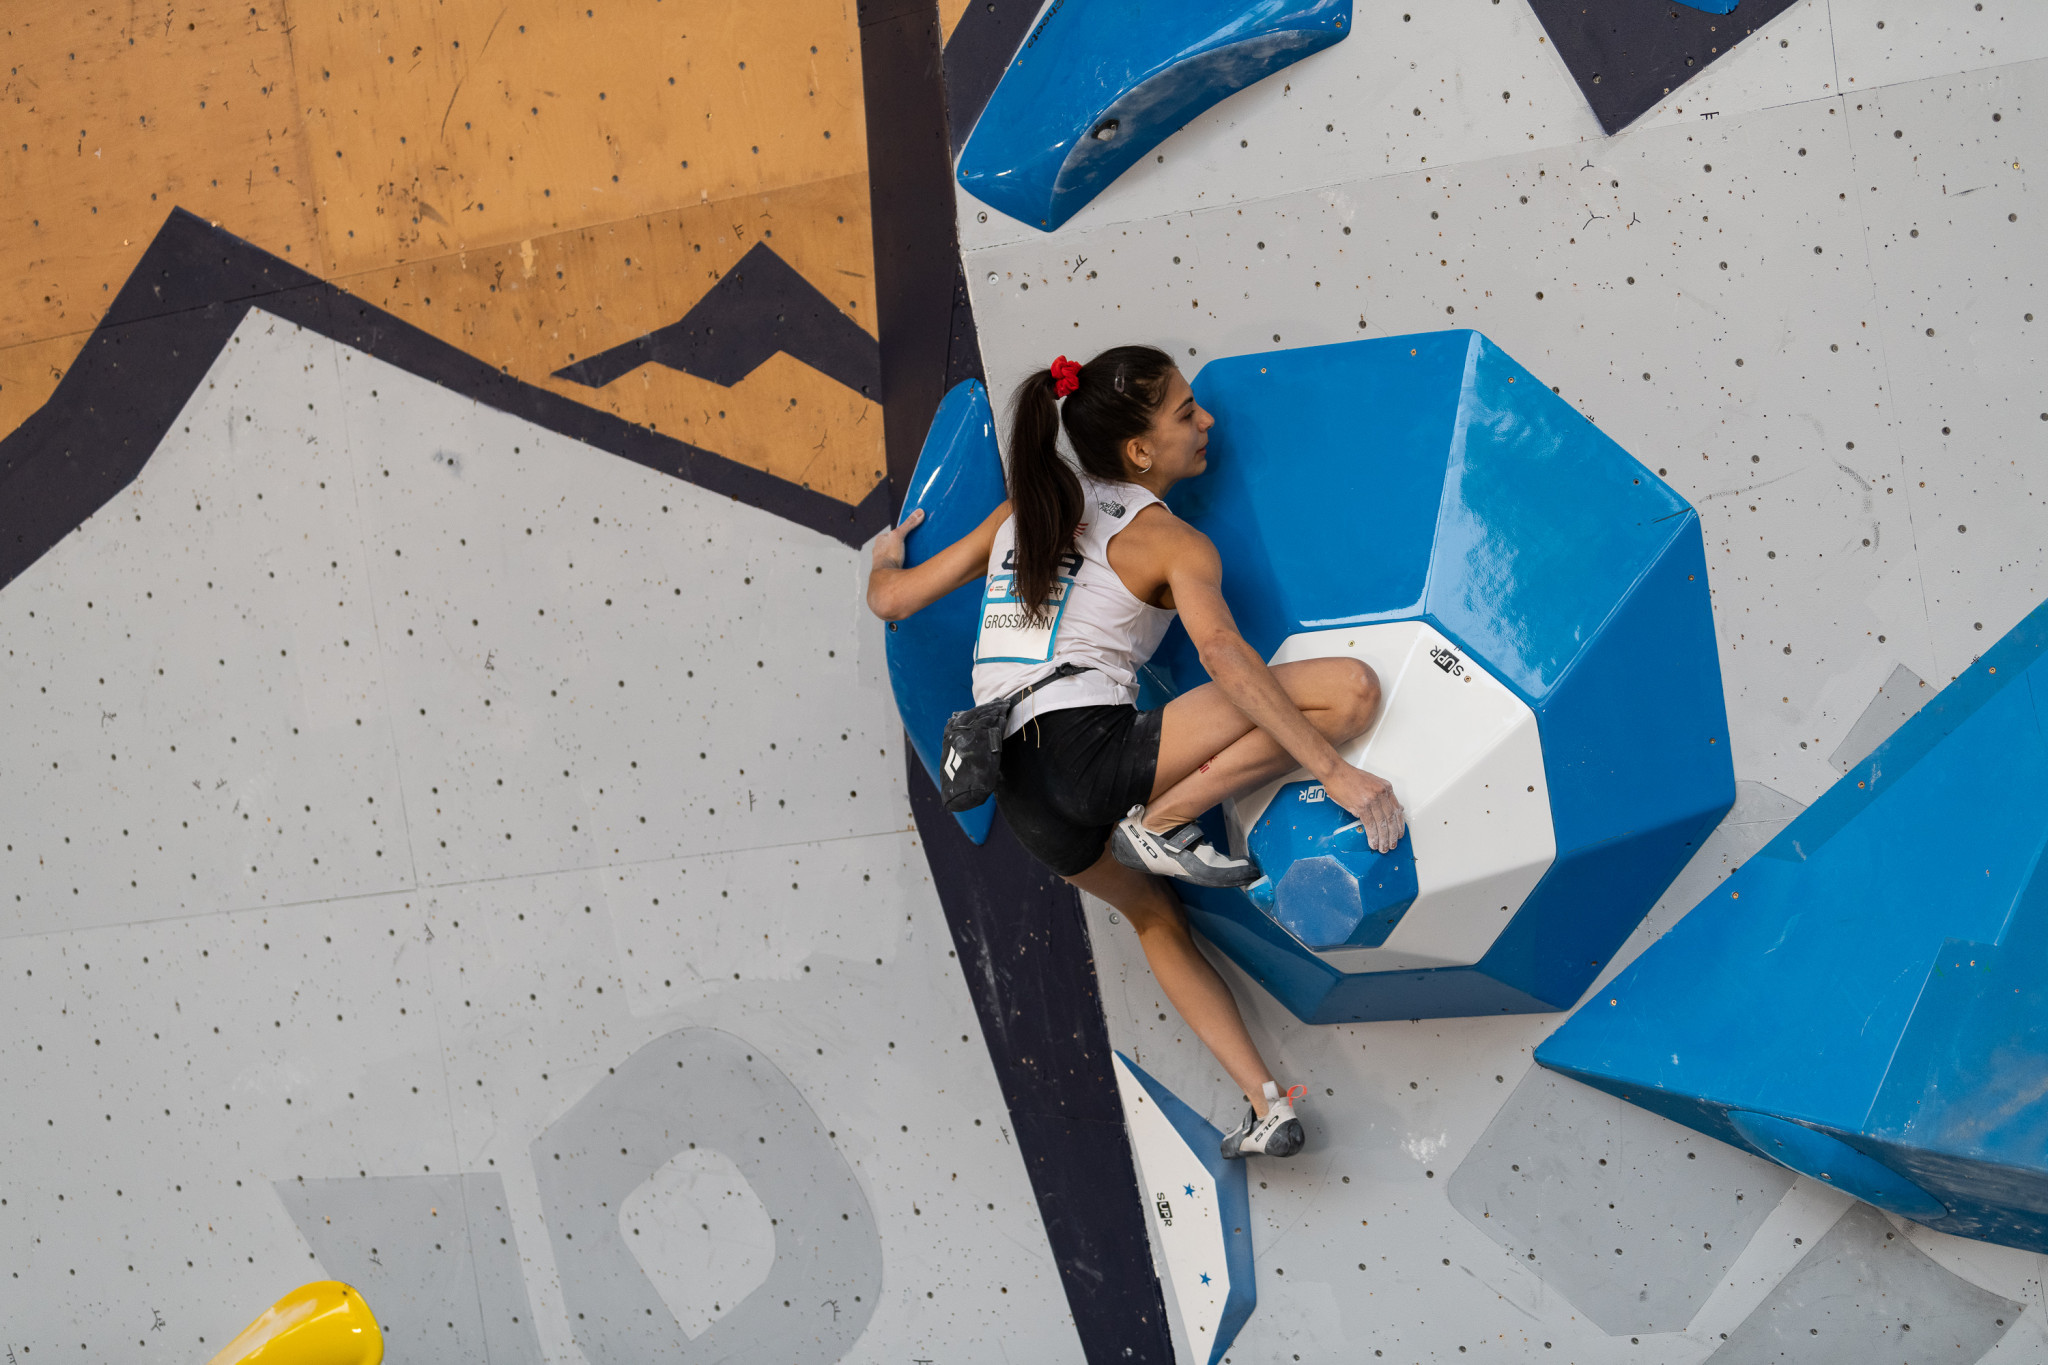 Grossman claims home success at Sport Climbing World Cup in Salt Lake City